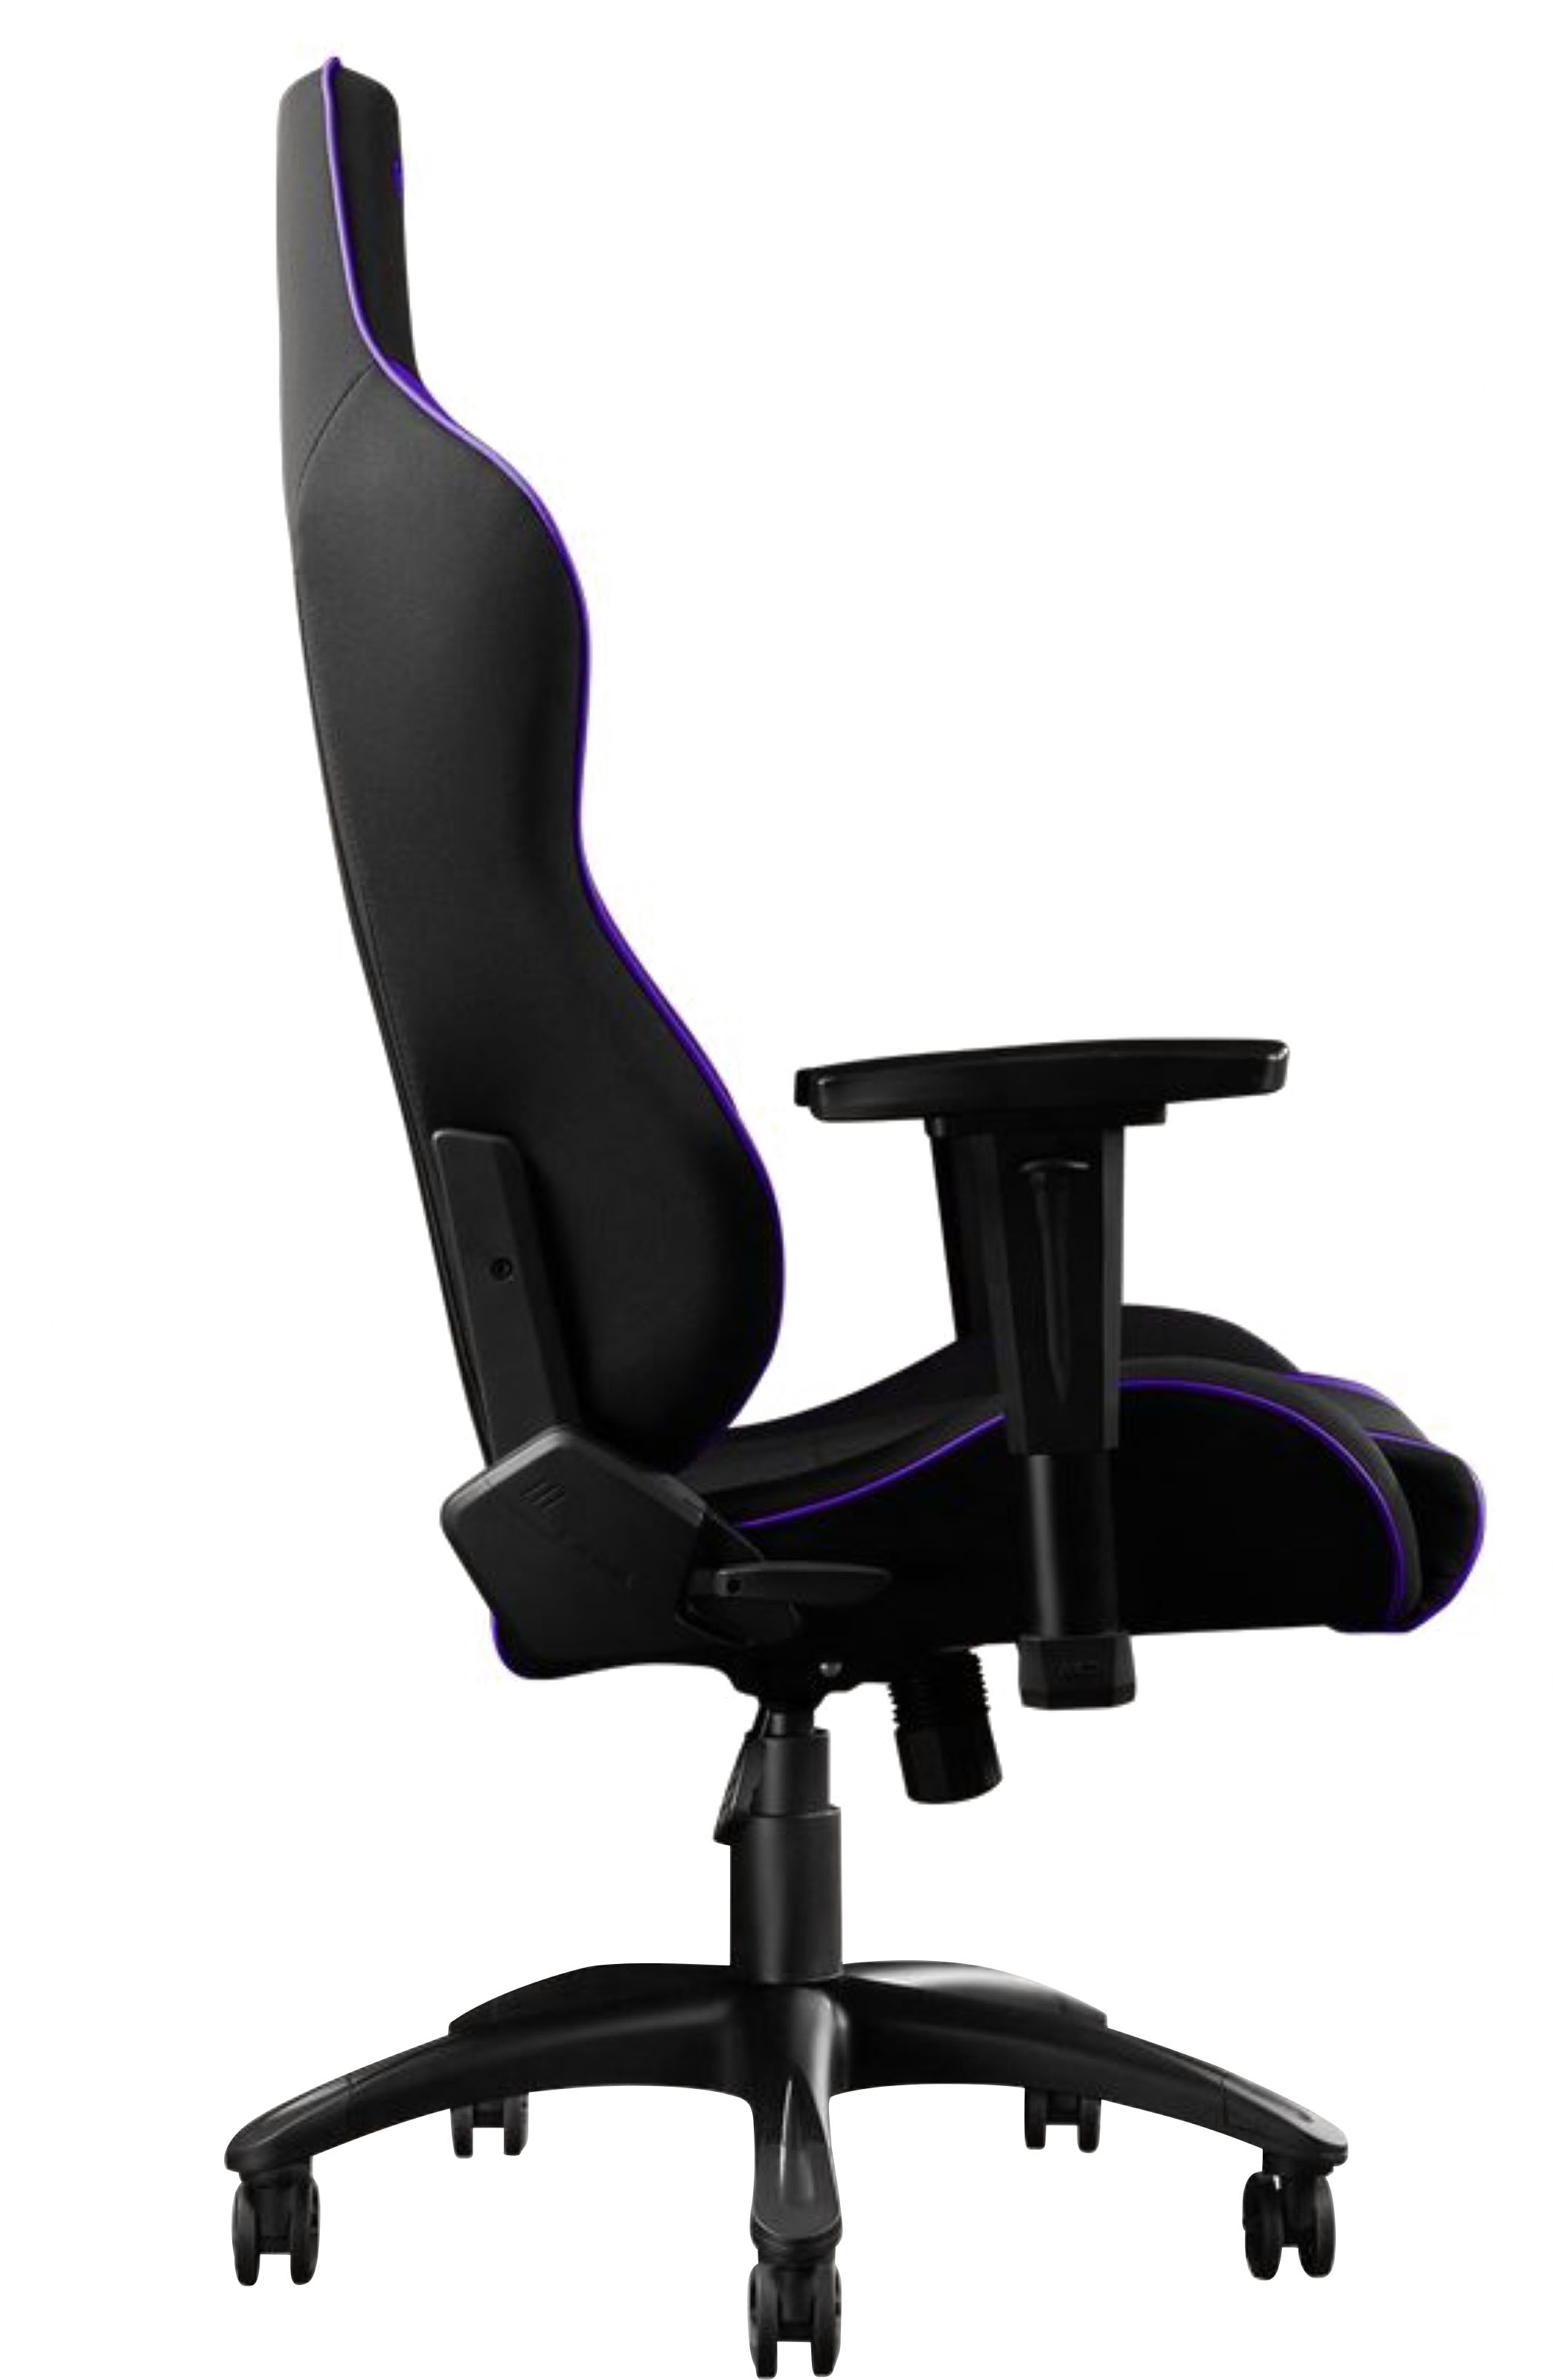 Left View: AKRacing - Core Series EX SE Fabric Gaming Chair - Indigo